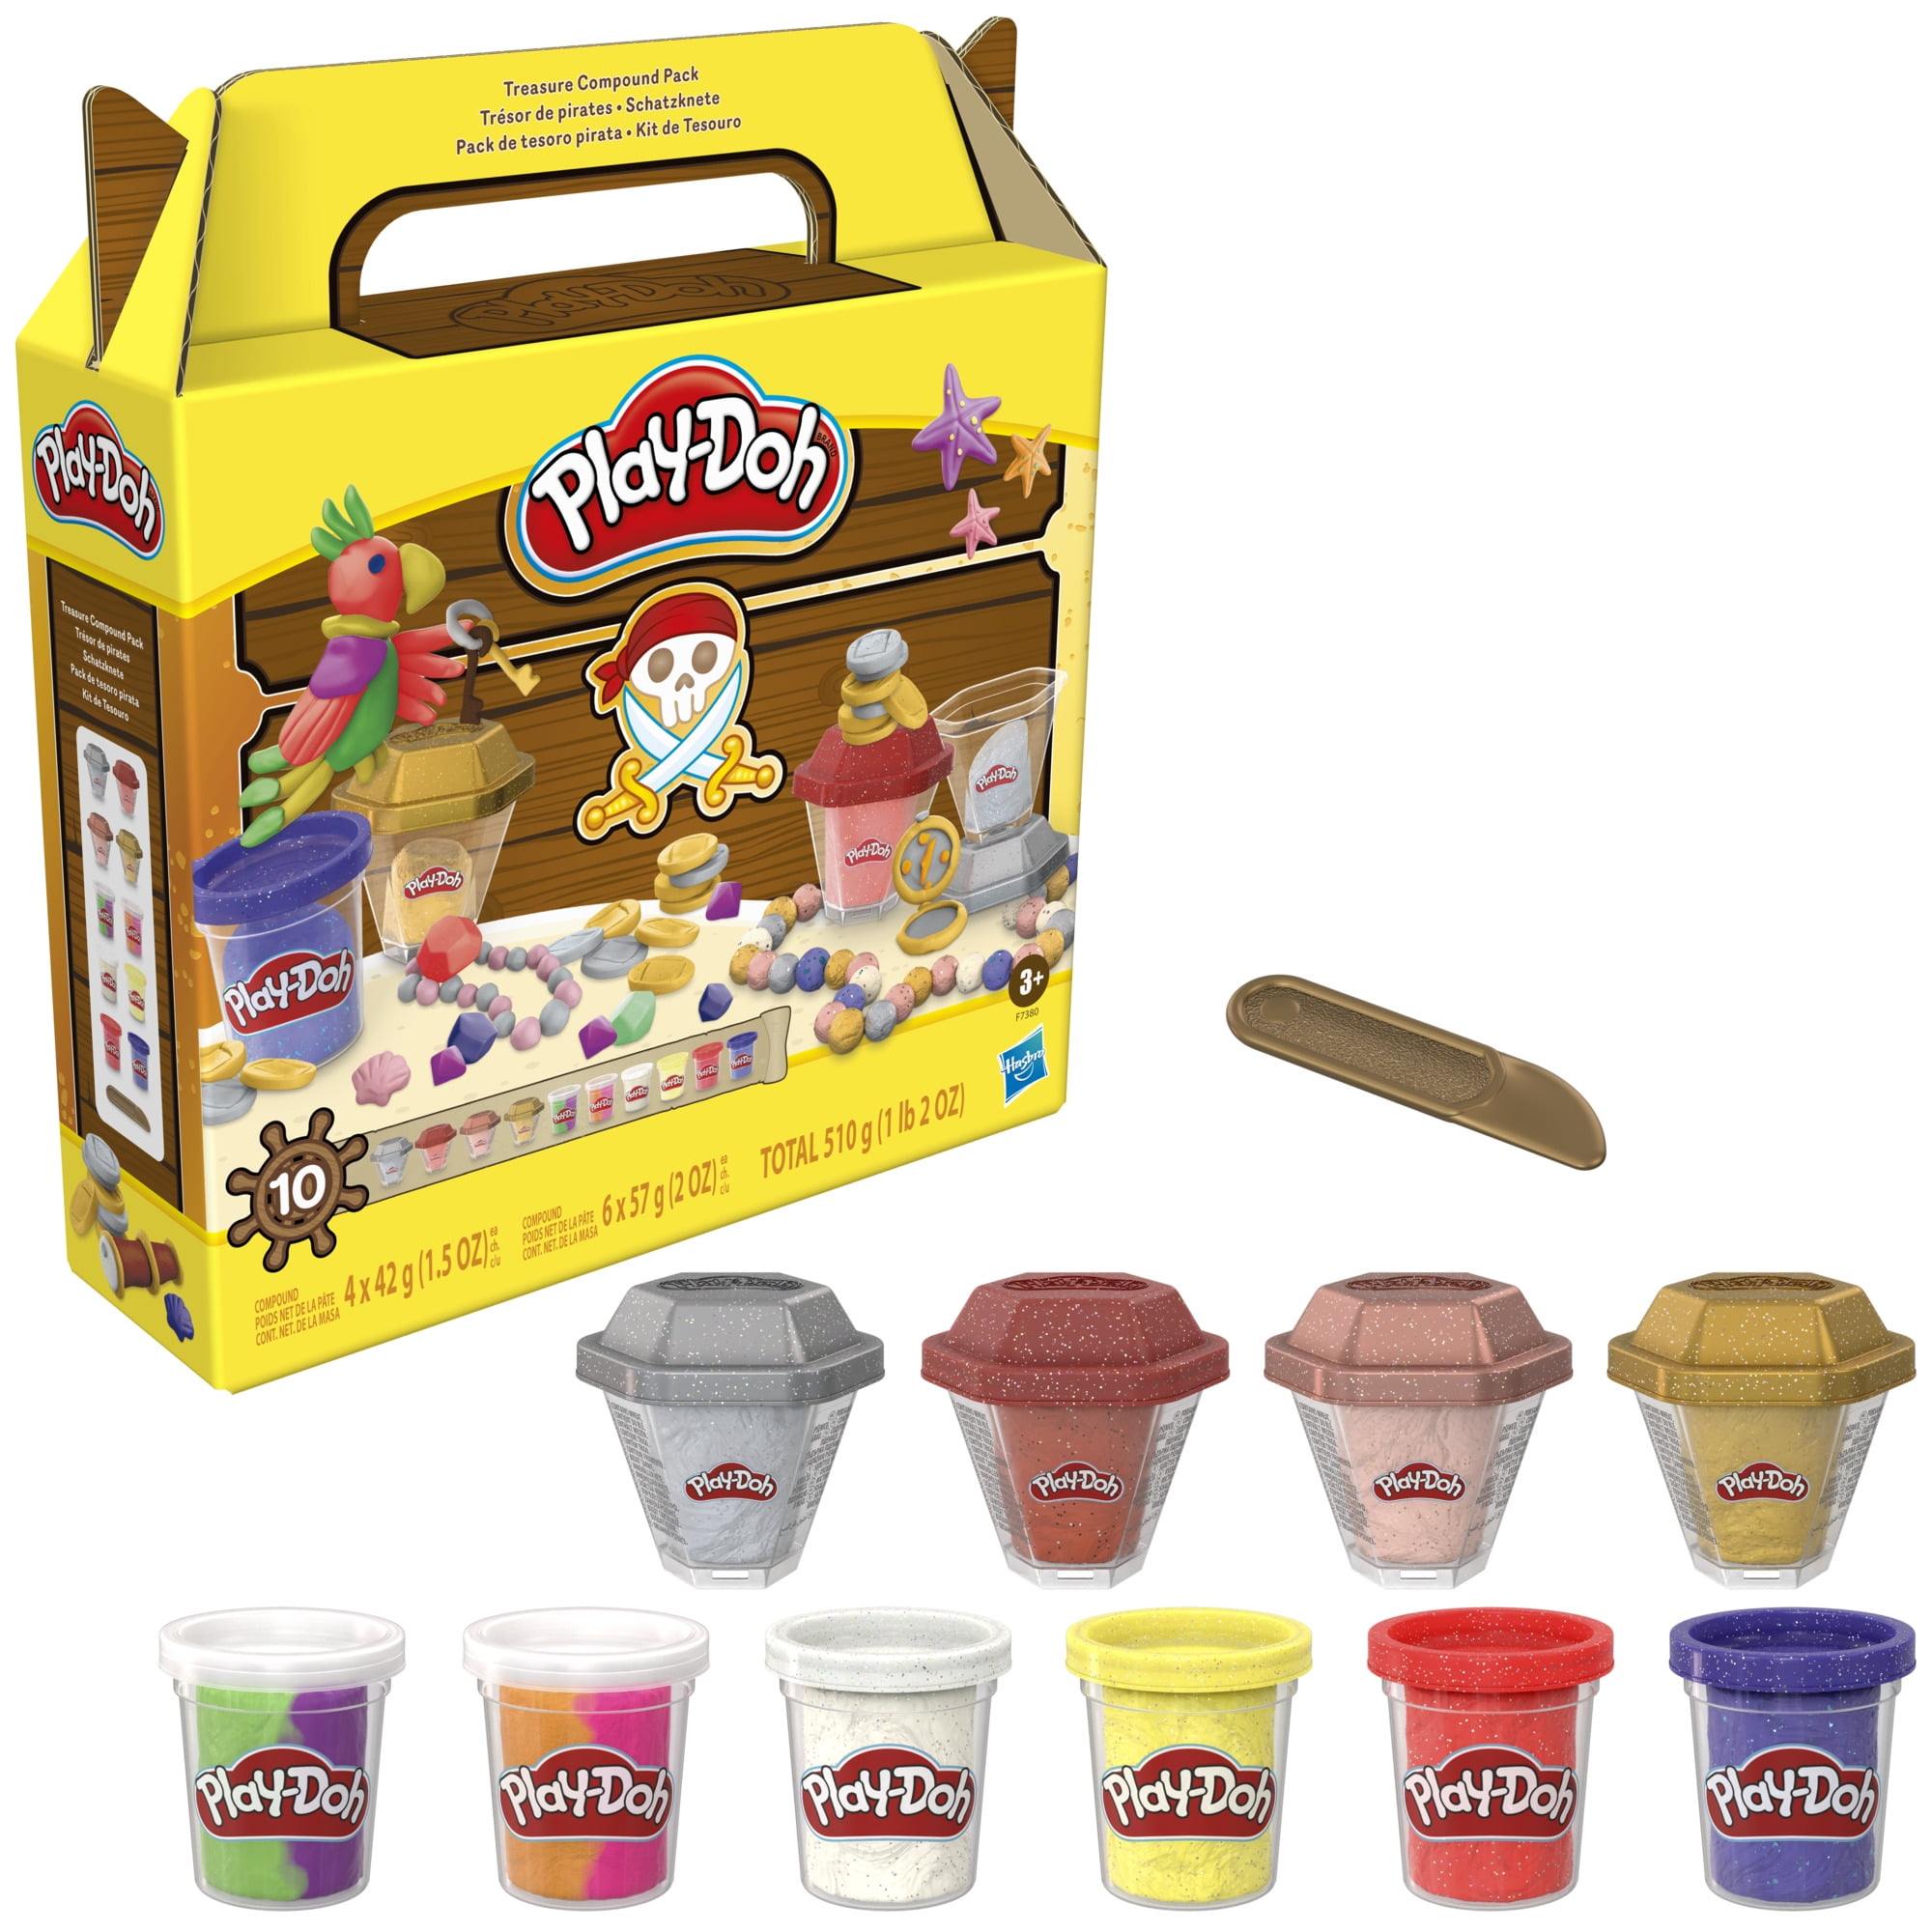 Play-Doh Treasure Compound Pack, Arts and Crafts for Kids (18 oz), Size: One Size